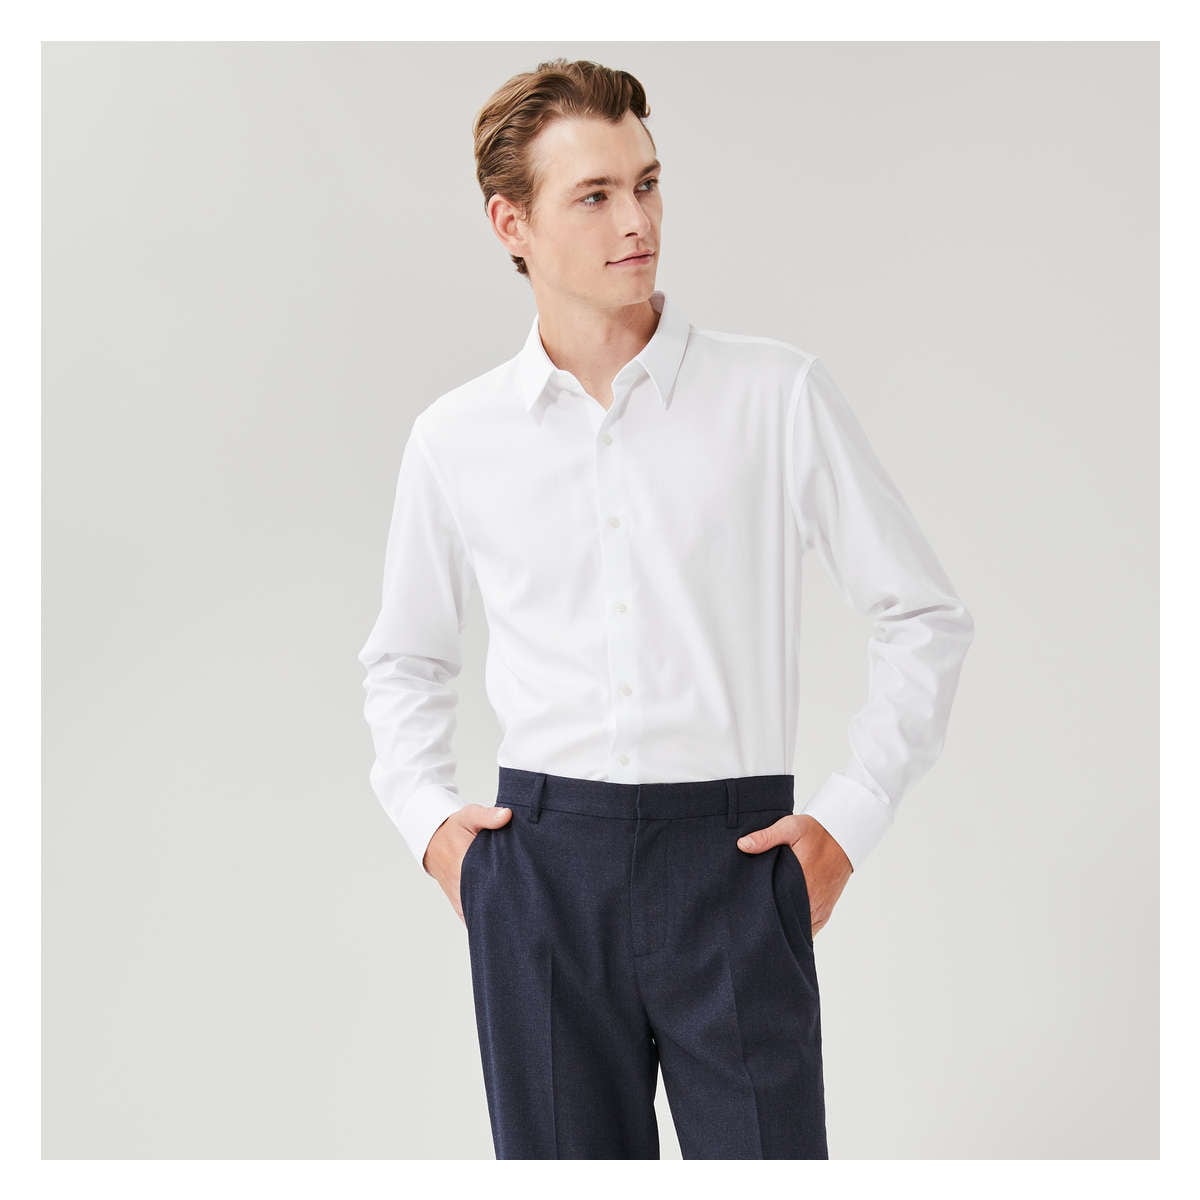 Pinpoint Solid White Non-Iron Dress Shirt